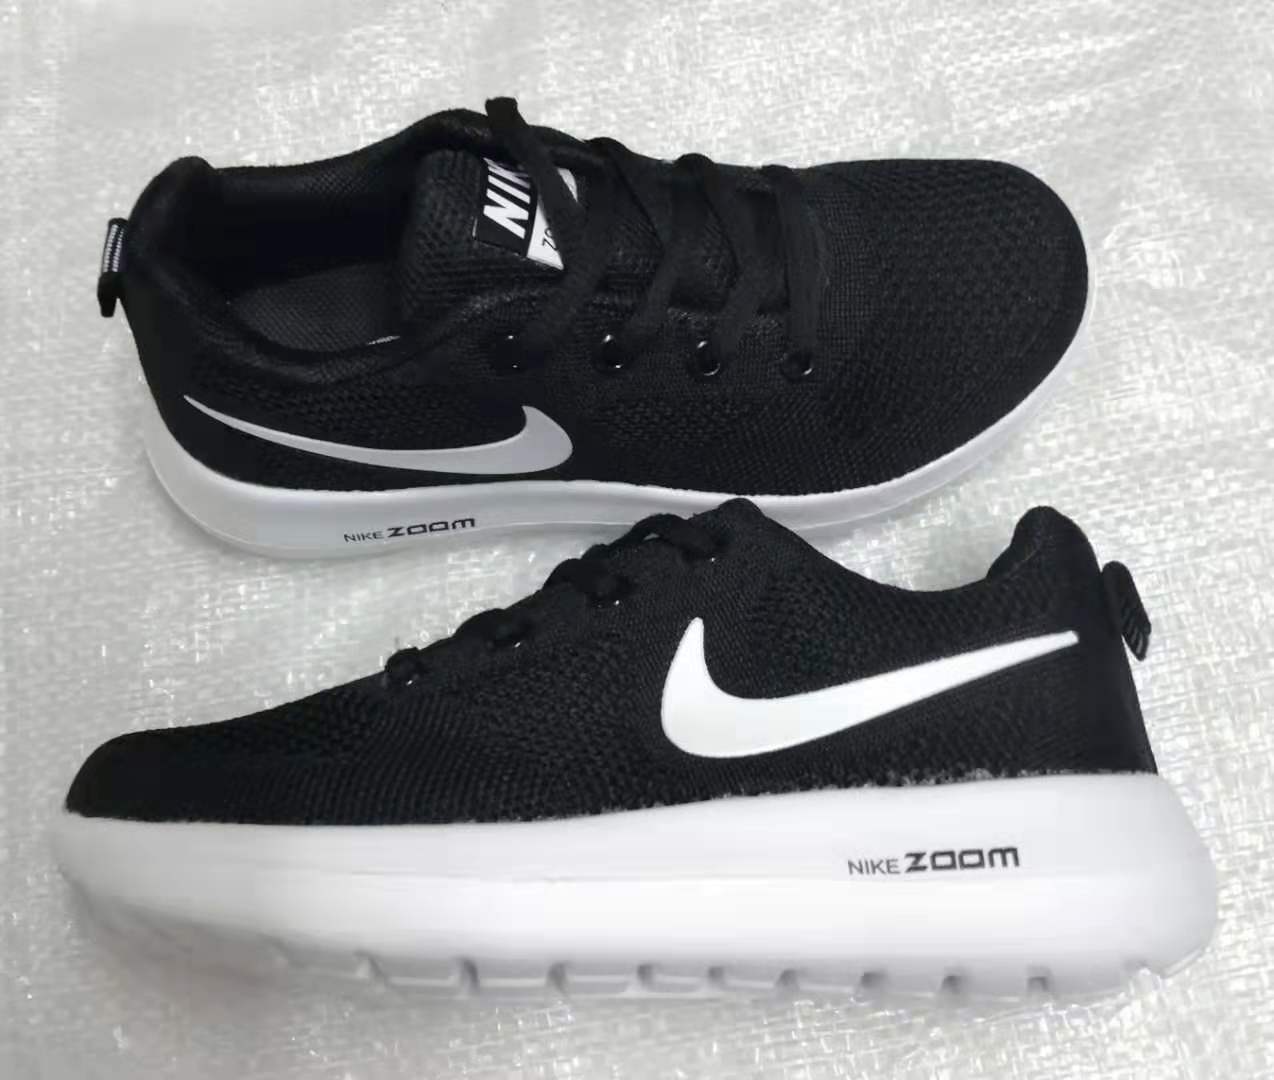 NIKE ZOOM RUNNING SHOES FOR KIDS 